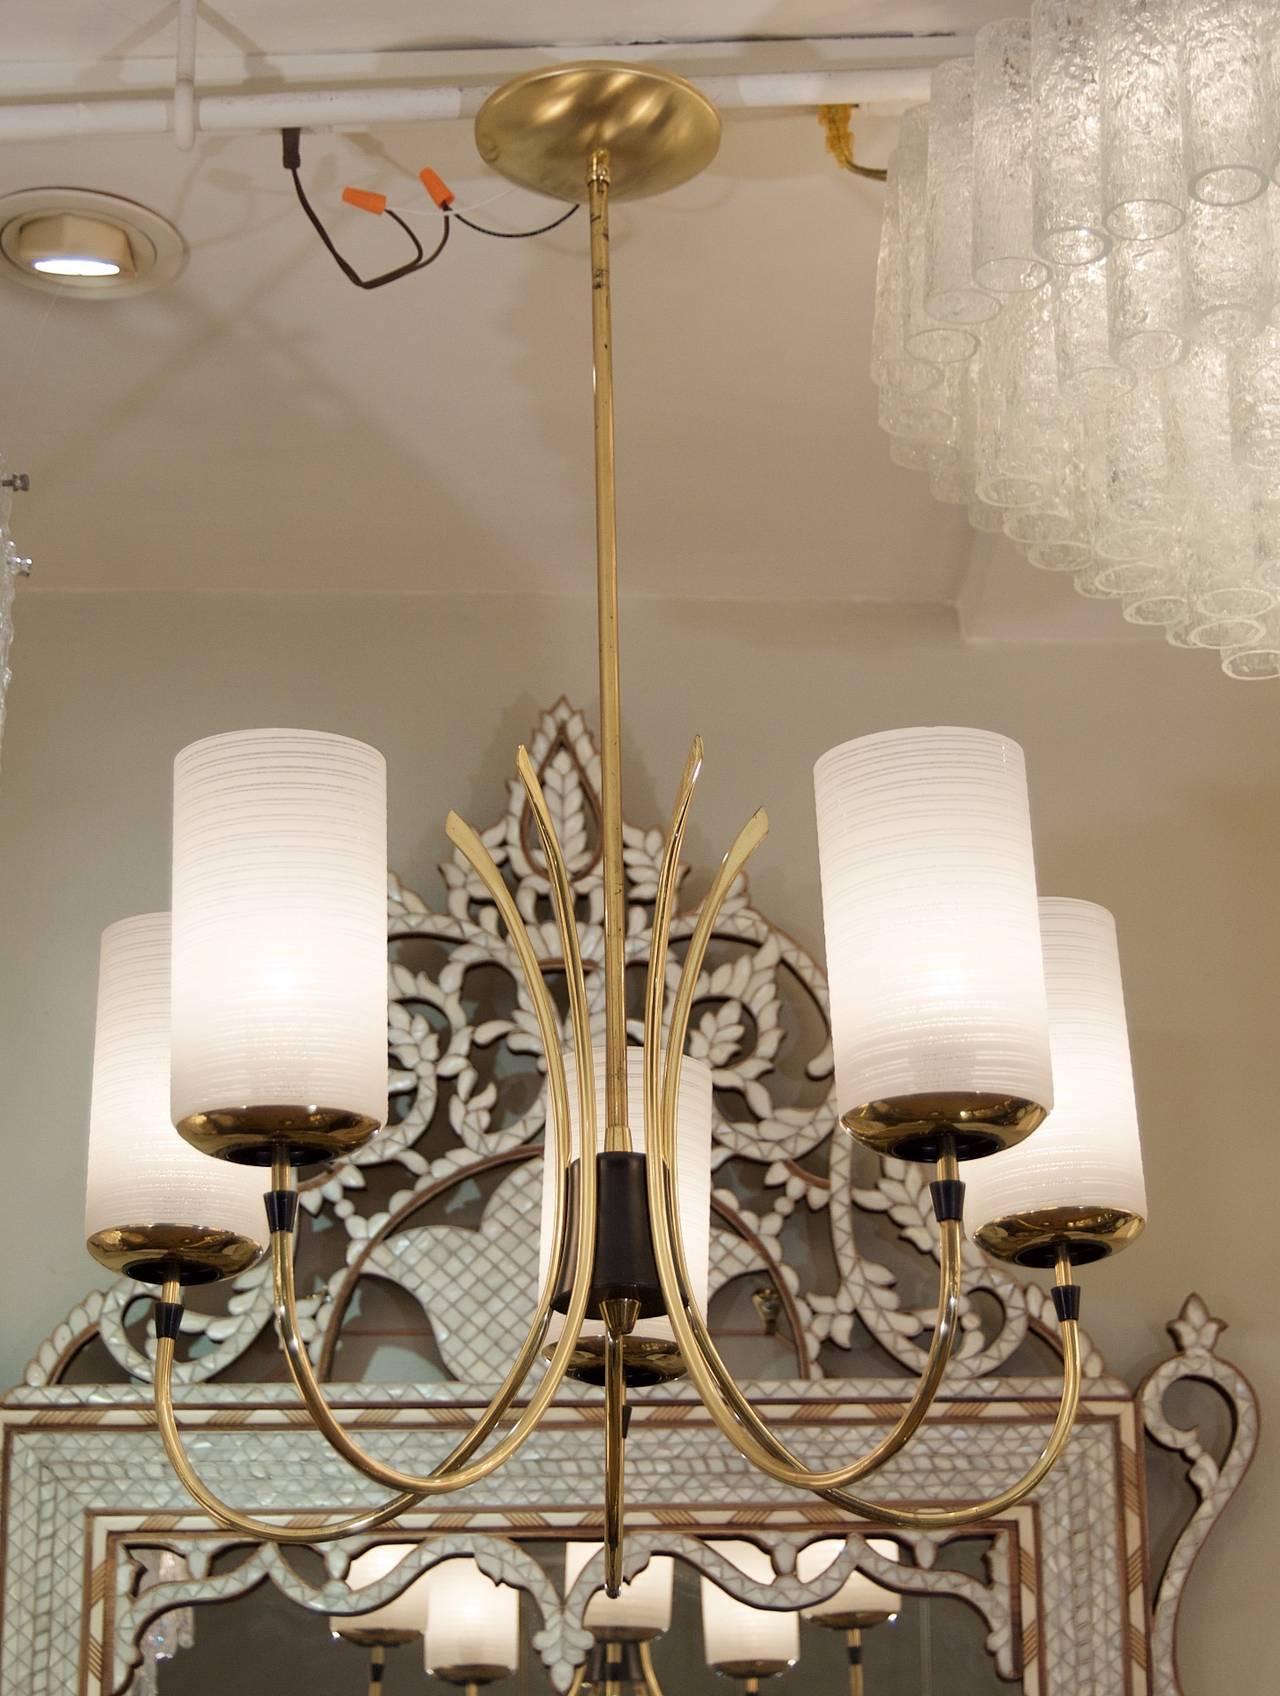 Five delicate brass arced arms each with a striped opal glass cylinder radially surrounding a black enameled cylinder to form an elegant and sophisticated chandelier.

Height listed is of chandelier body only, current height as hung is 30 inches,